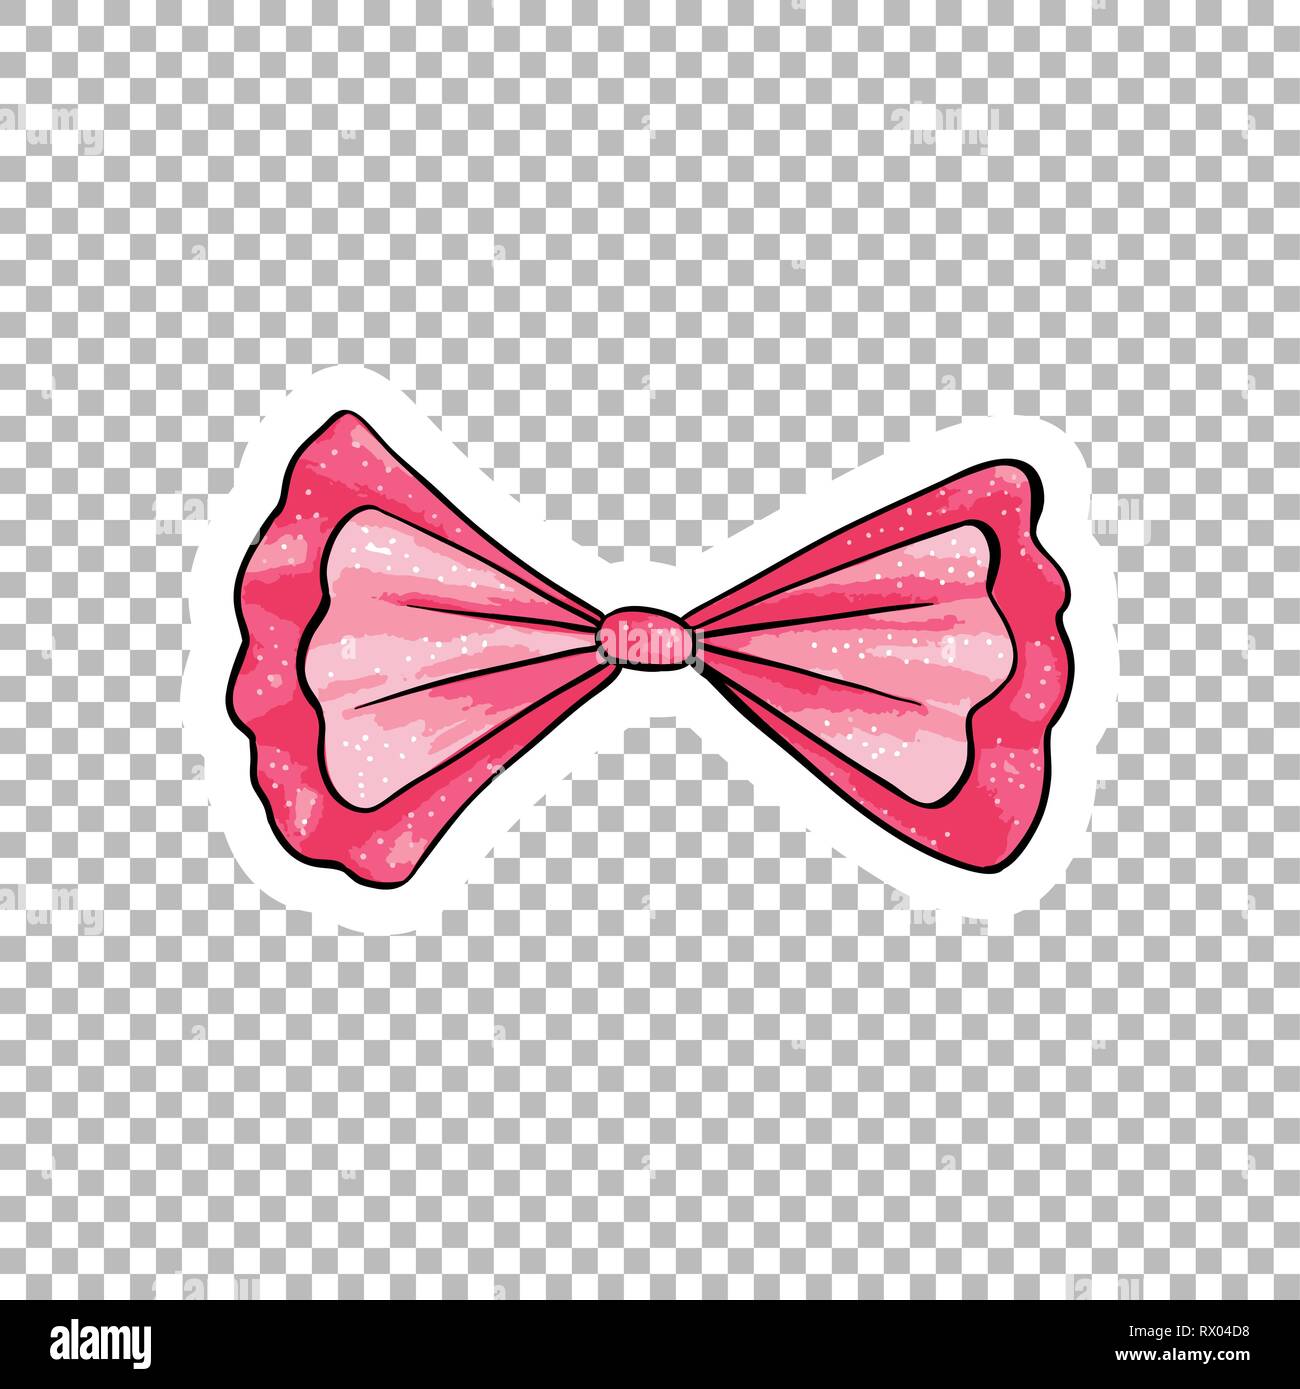 Pink bow hand drawn illustration. Ribbon knot contour drawing on  transparent background. Dotted bowknot isolated flat doodle clipart.  Bow-tie cartoon sticker. Greeting card watercolor design element Stock  Vector Image & Art 